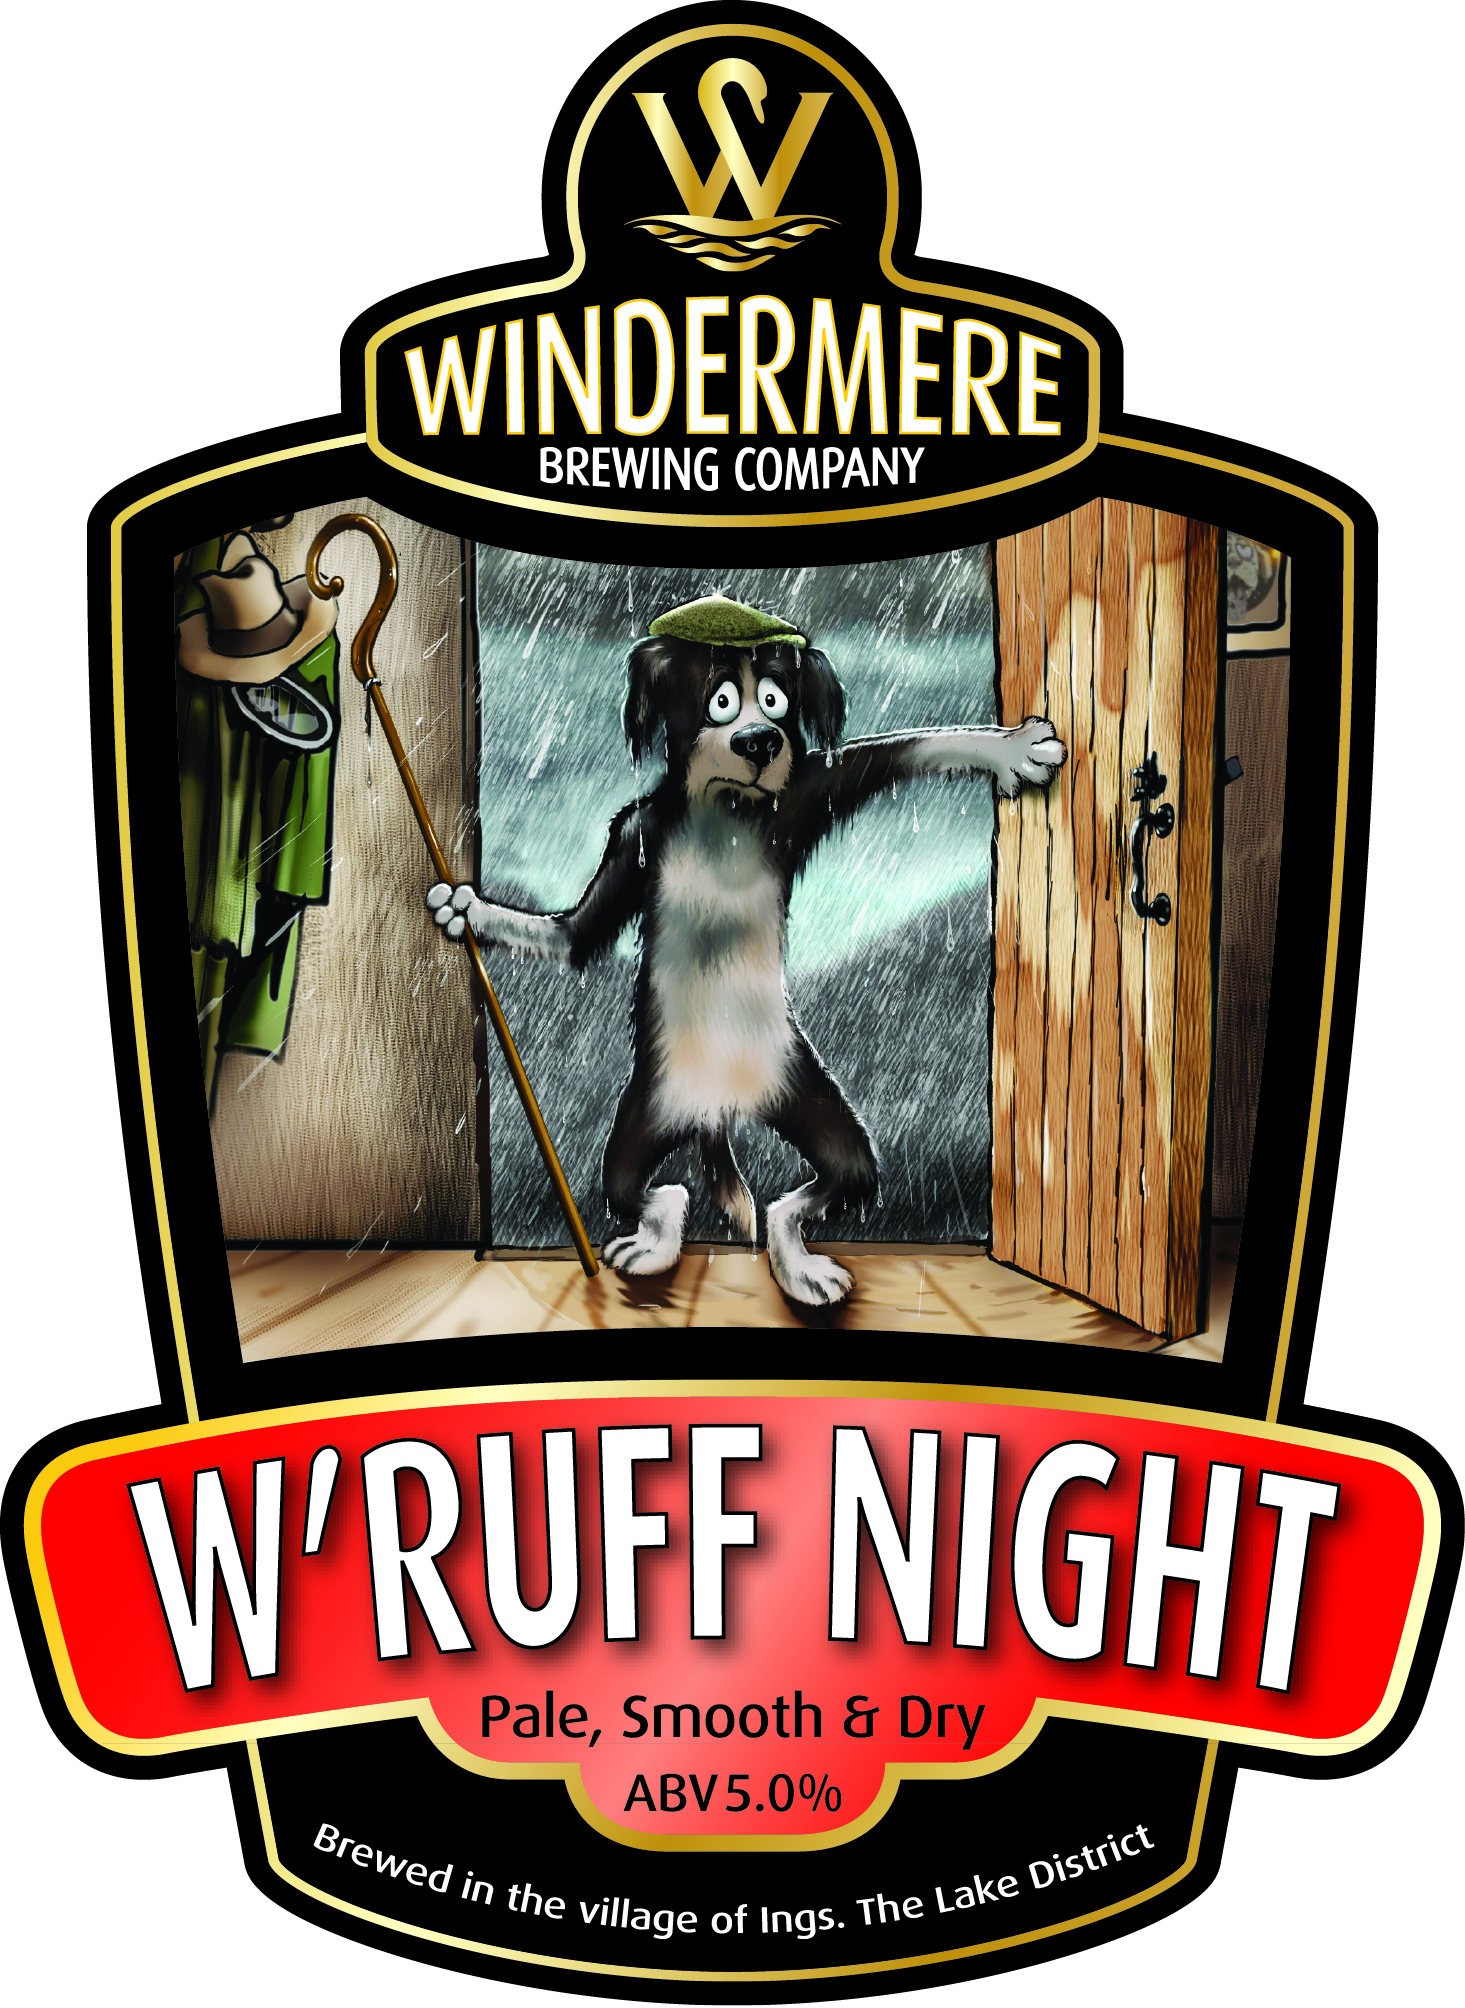 Wruff Night The Watermill Windermere Brewing Co